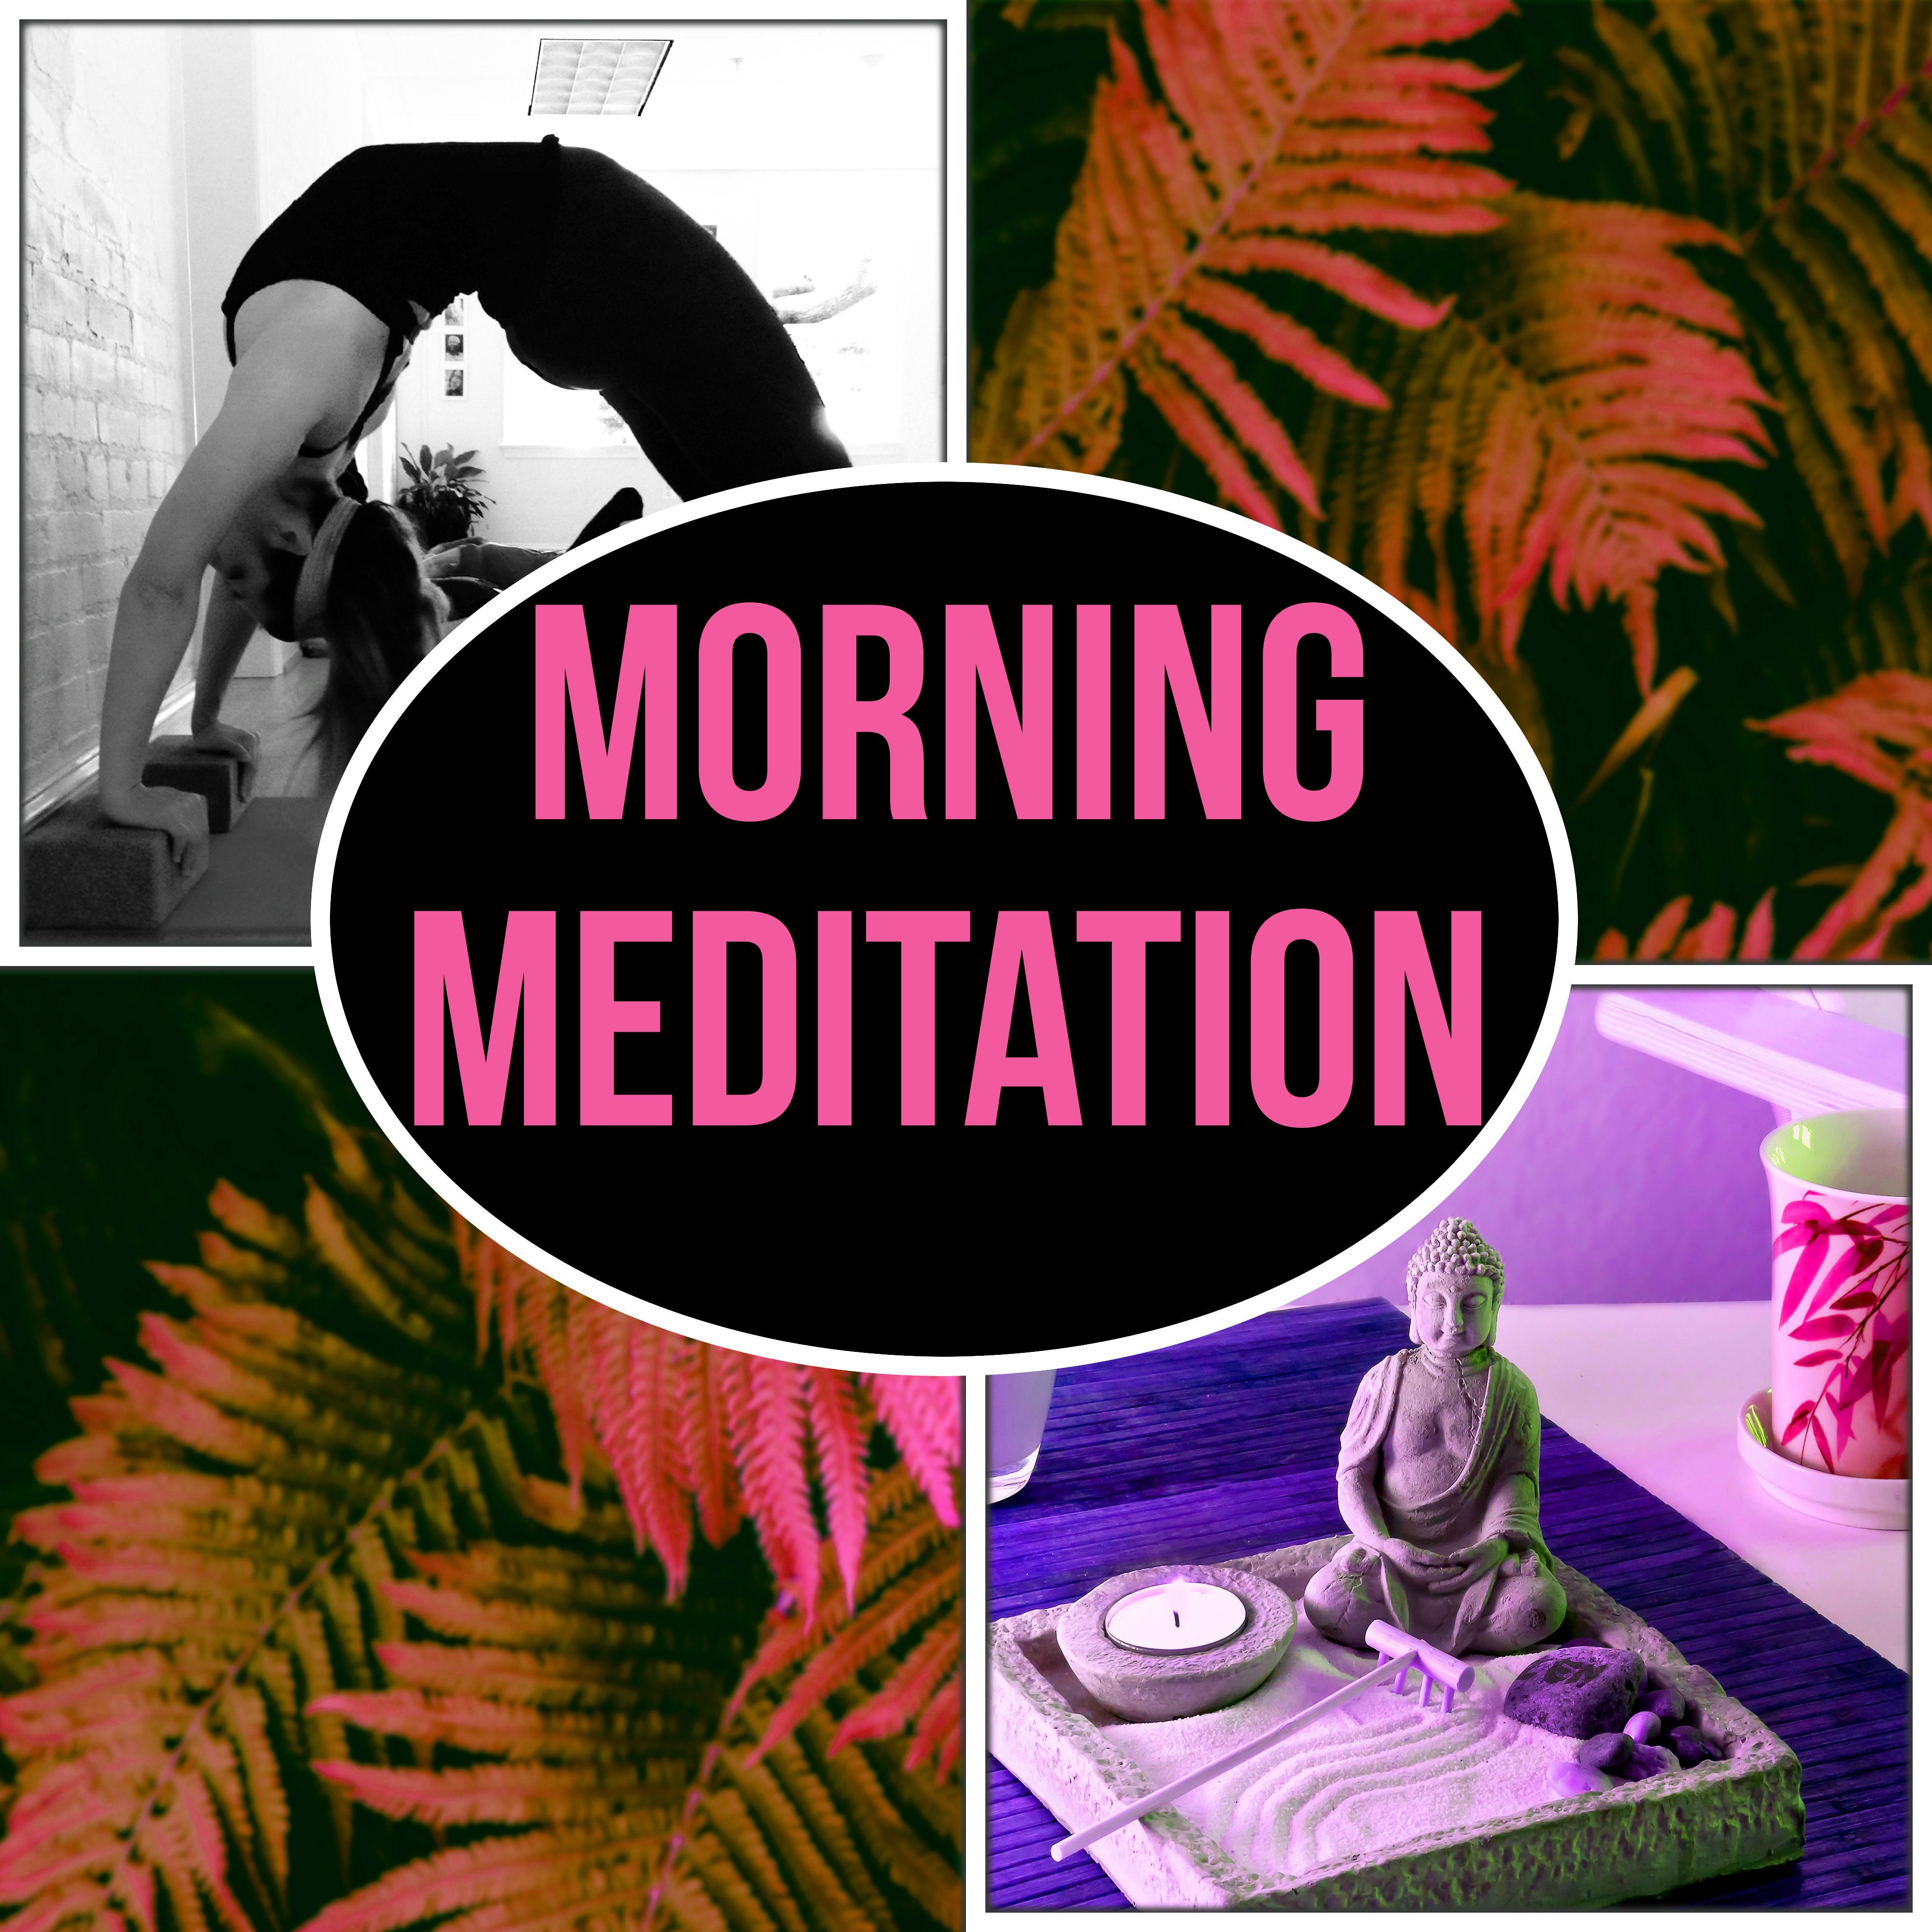 Morning Meditation  Yoga New Age, Relaxation, Nature Sounds, Calmness, Concentration